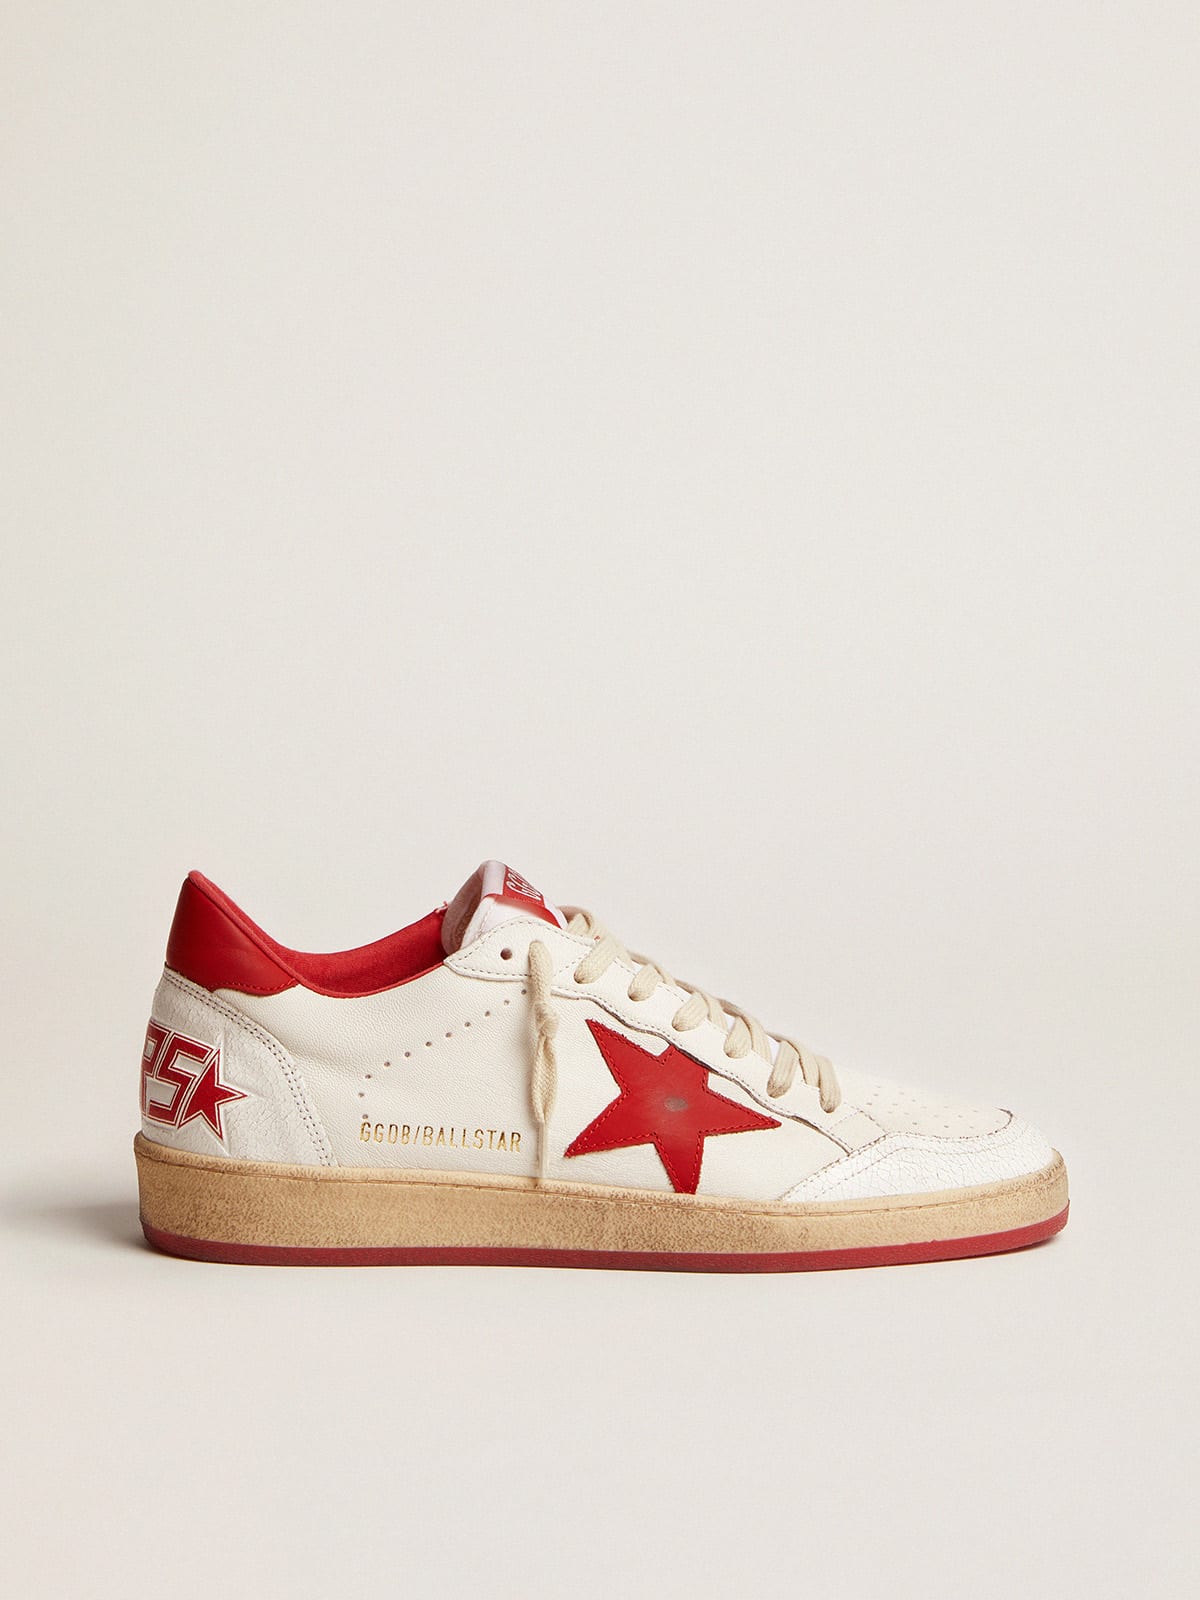 Golden Goose - White Ball Star sneakers in leather with red star and heel tab in 